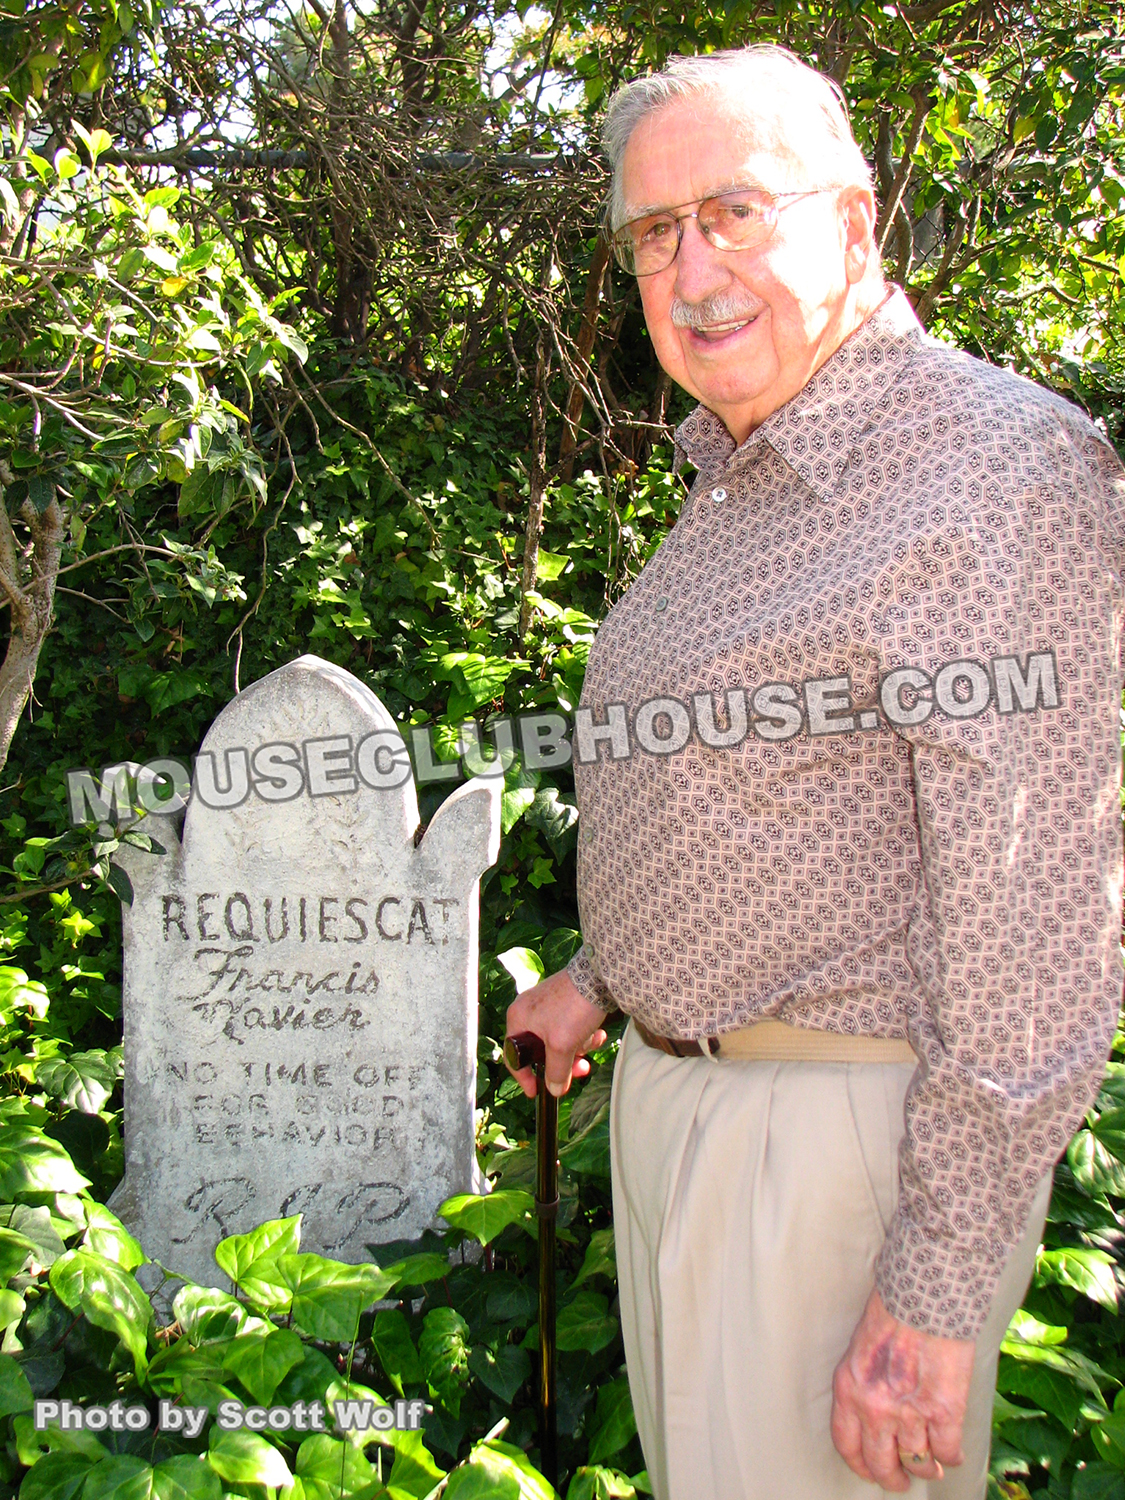 X Atencio stands by the tombstone tribute to him that used to reside outside the Haunted Mansion in Disneyland, but is now in his home backyard